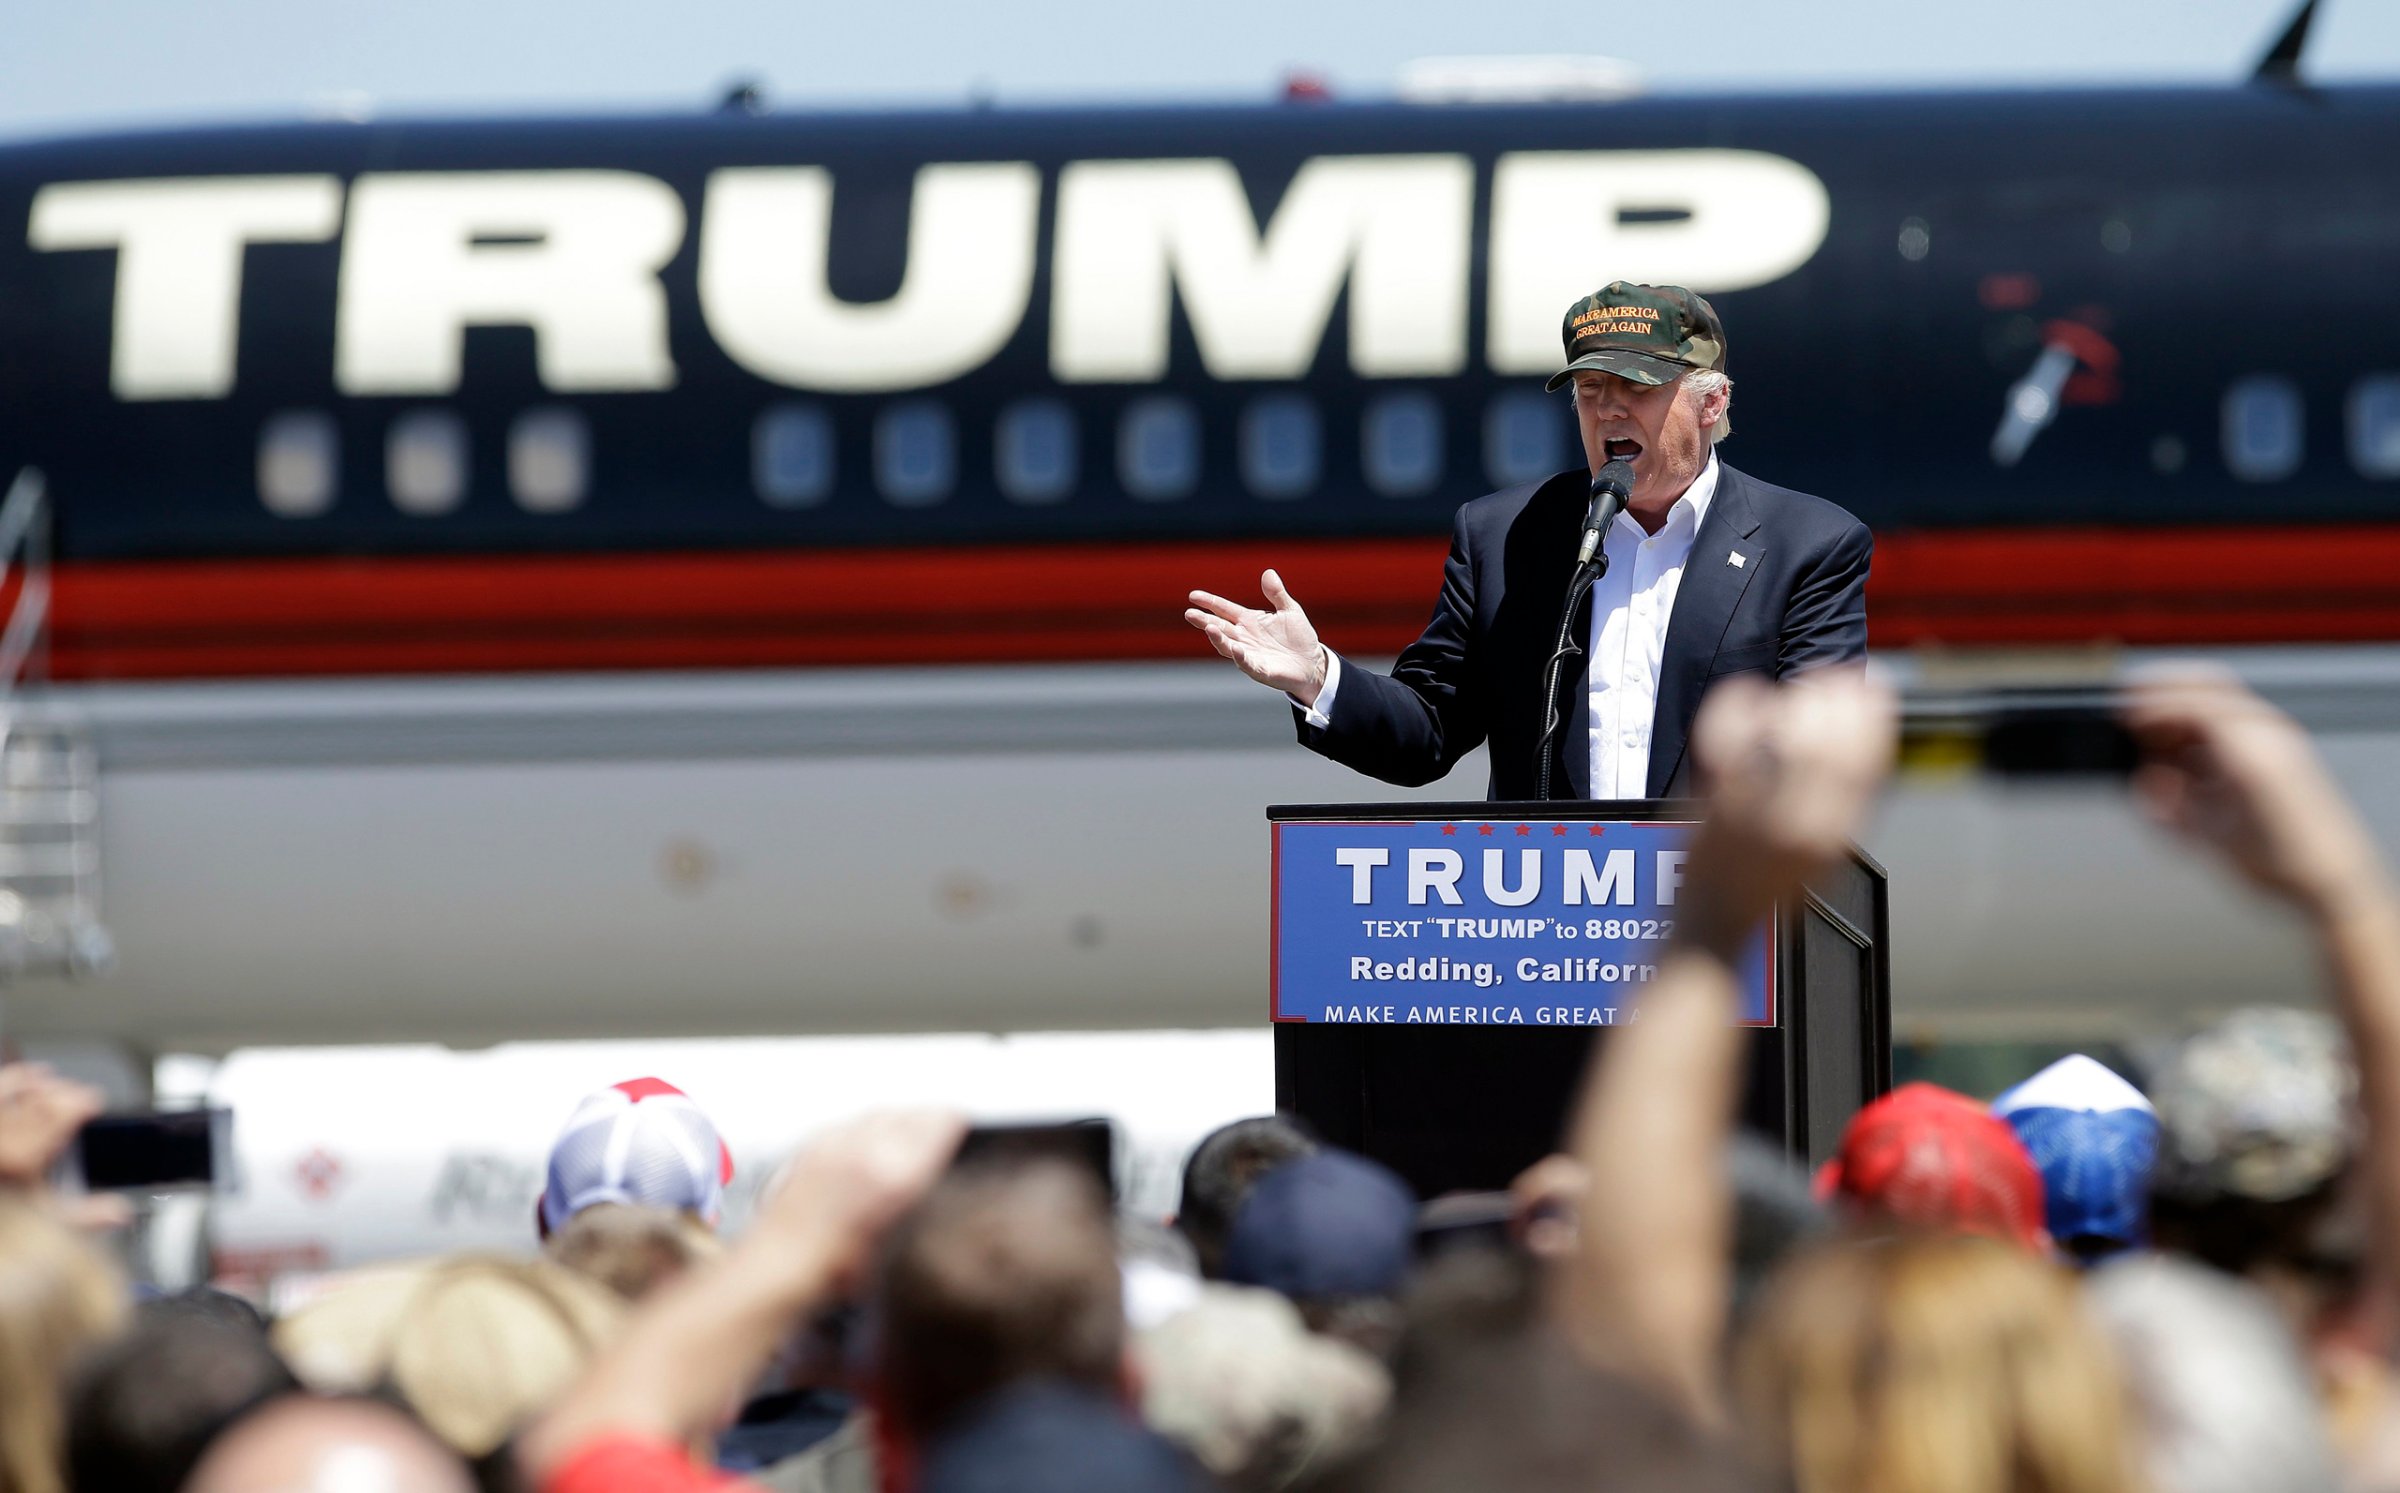 Republican presidential candidate Donald Trump speaks at a campaign rally at the Redding Municipal Airport in Redding, Calif., June 3, 2016.